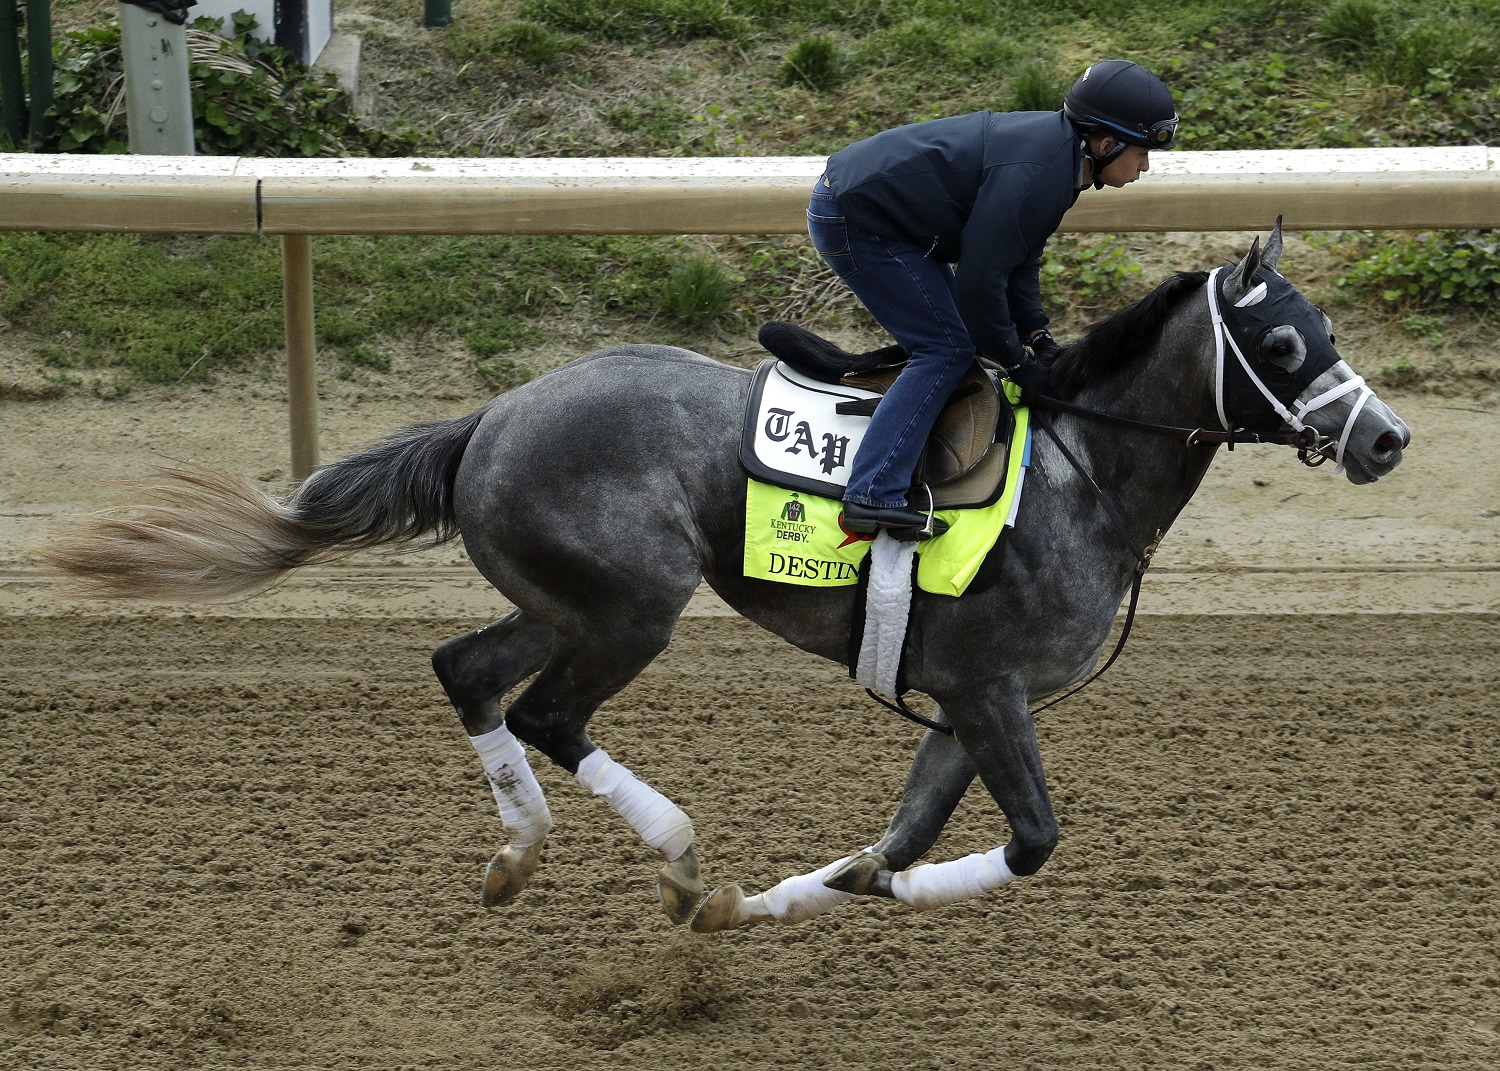 Exercise rider Ovel Merida rides Kentucky Derby hopeful Destin during a workout at Churchill Downs Wednesday, May 4, 2016, in Louisville, Ky. The 142nd running of the Kentucky Derby is scheduled for Saturday, May 7. (AP Photo/Charlie Riedel)